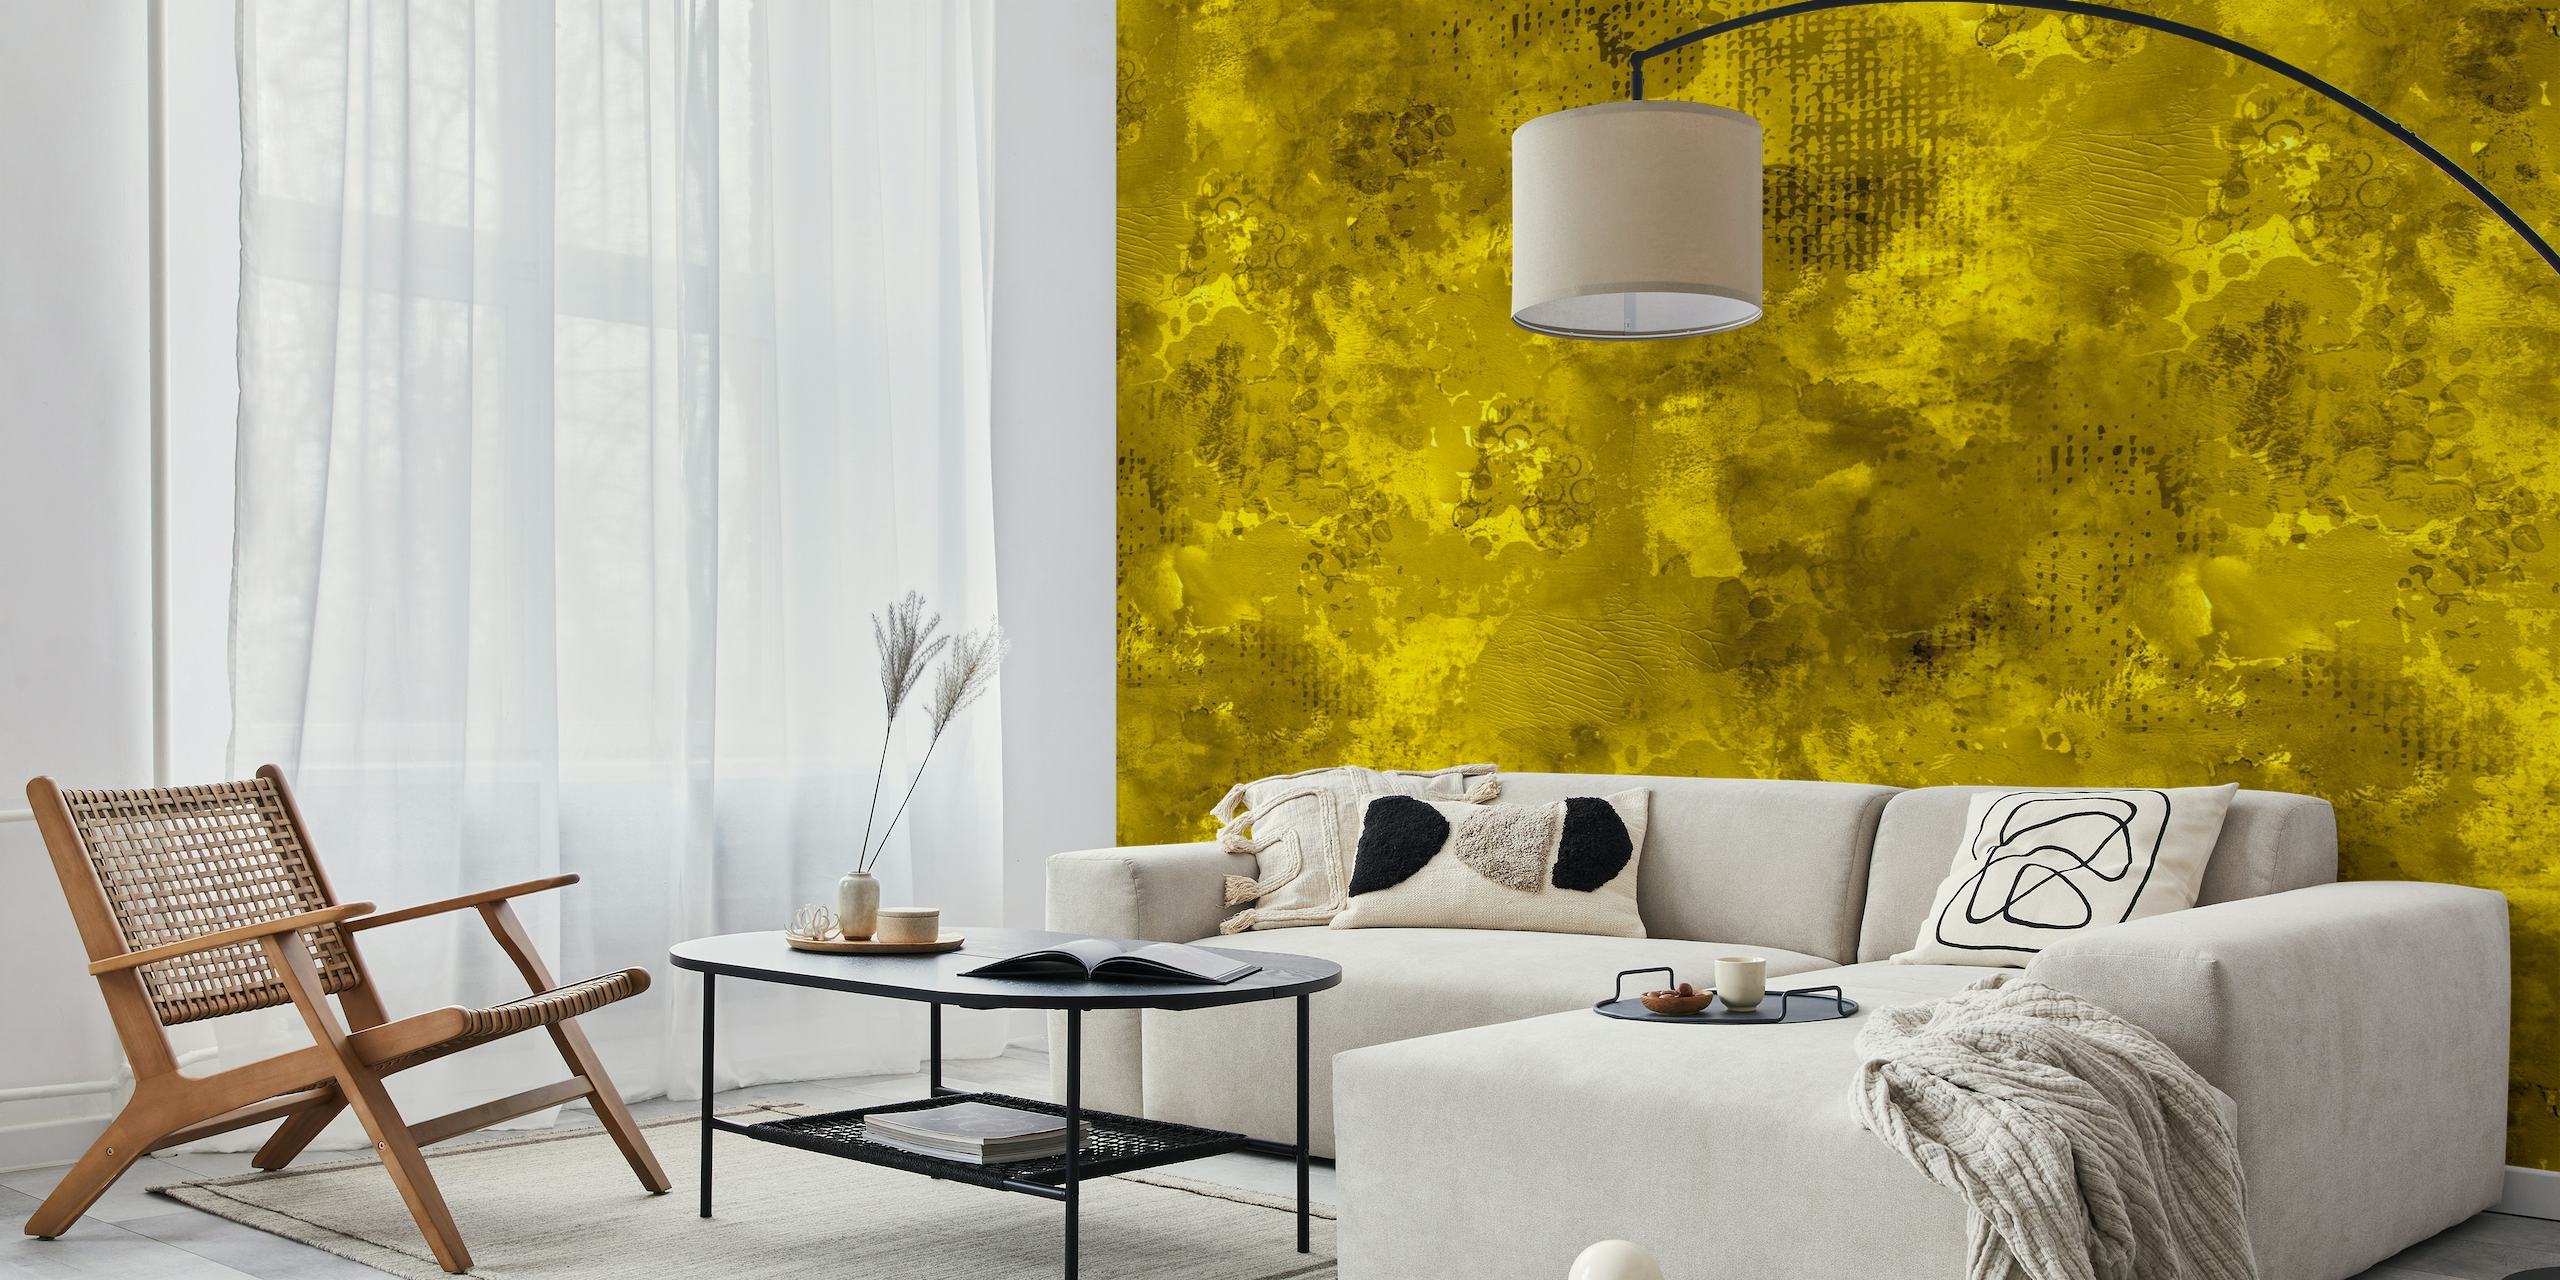 Dynamic and bold Modern Abstract Yellow Paint Texture wall mural creating a vivid visual statement.